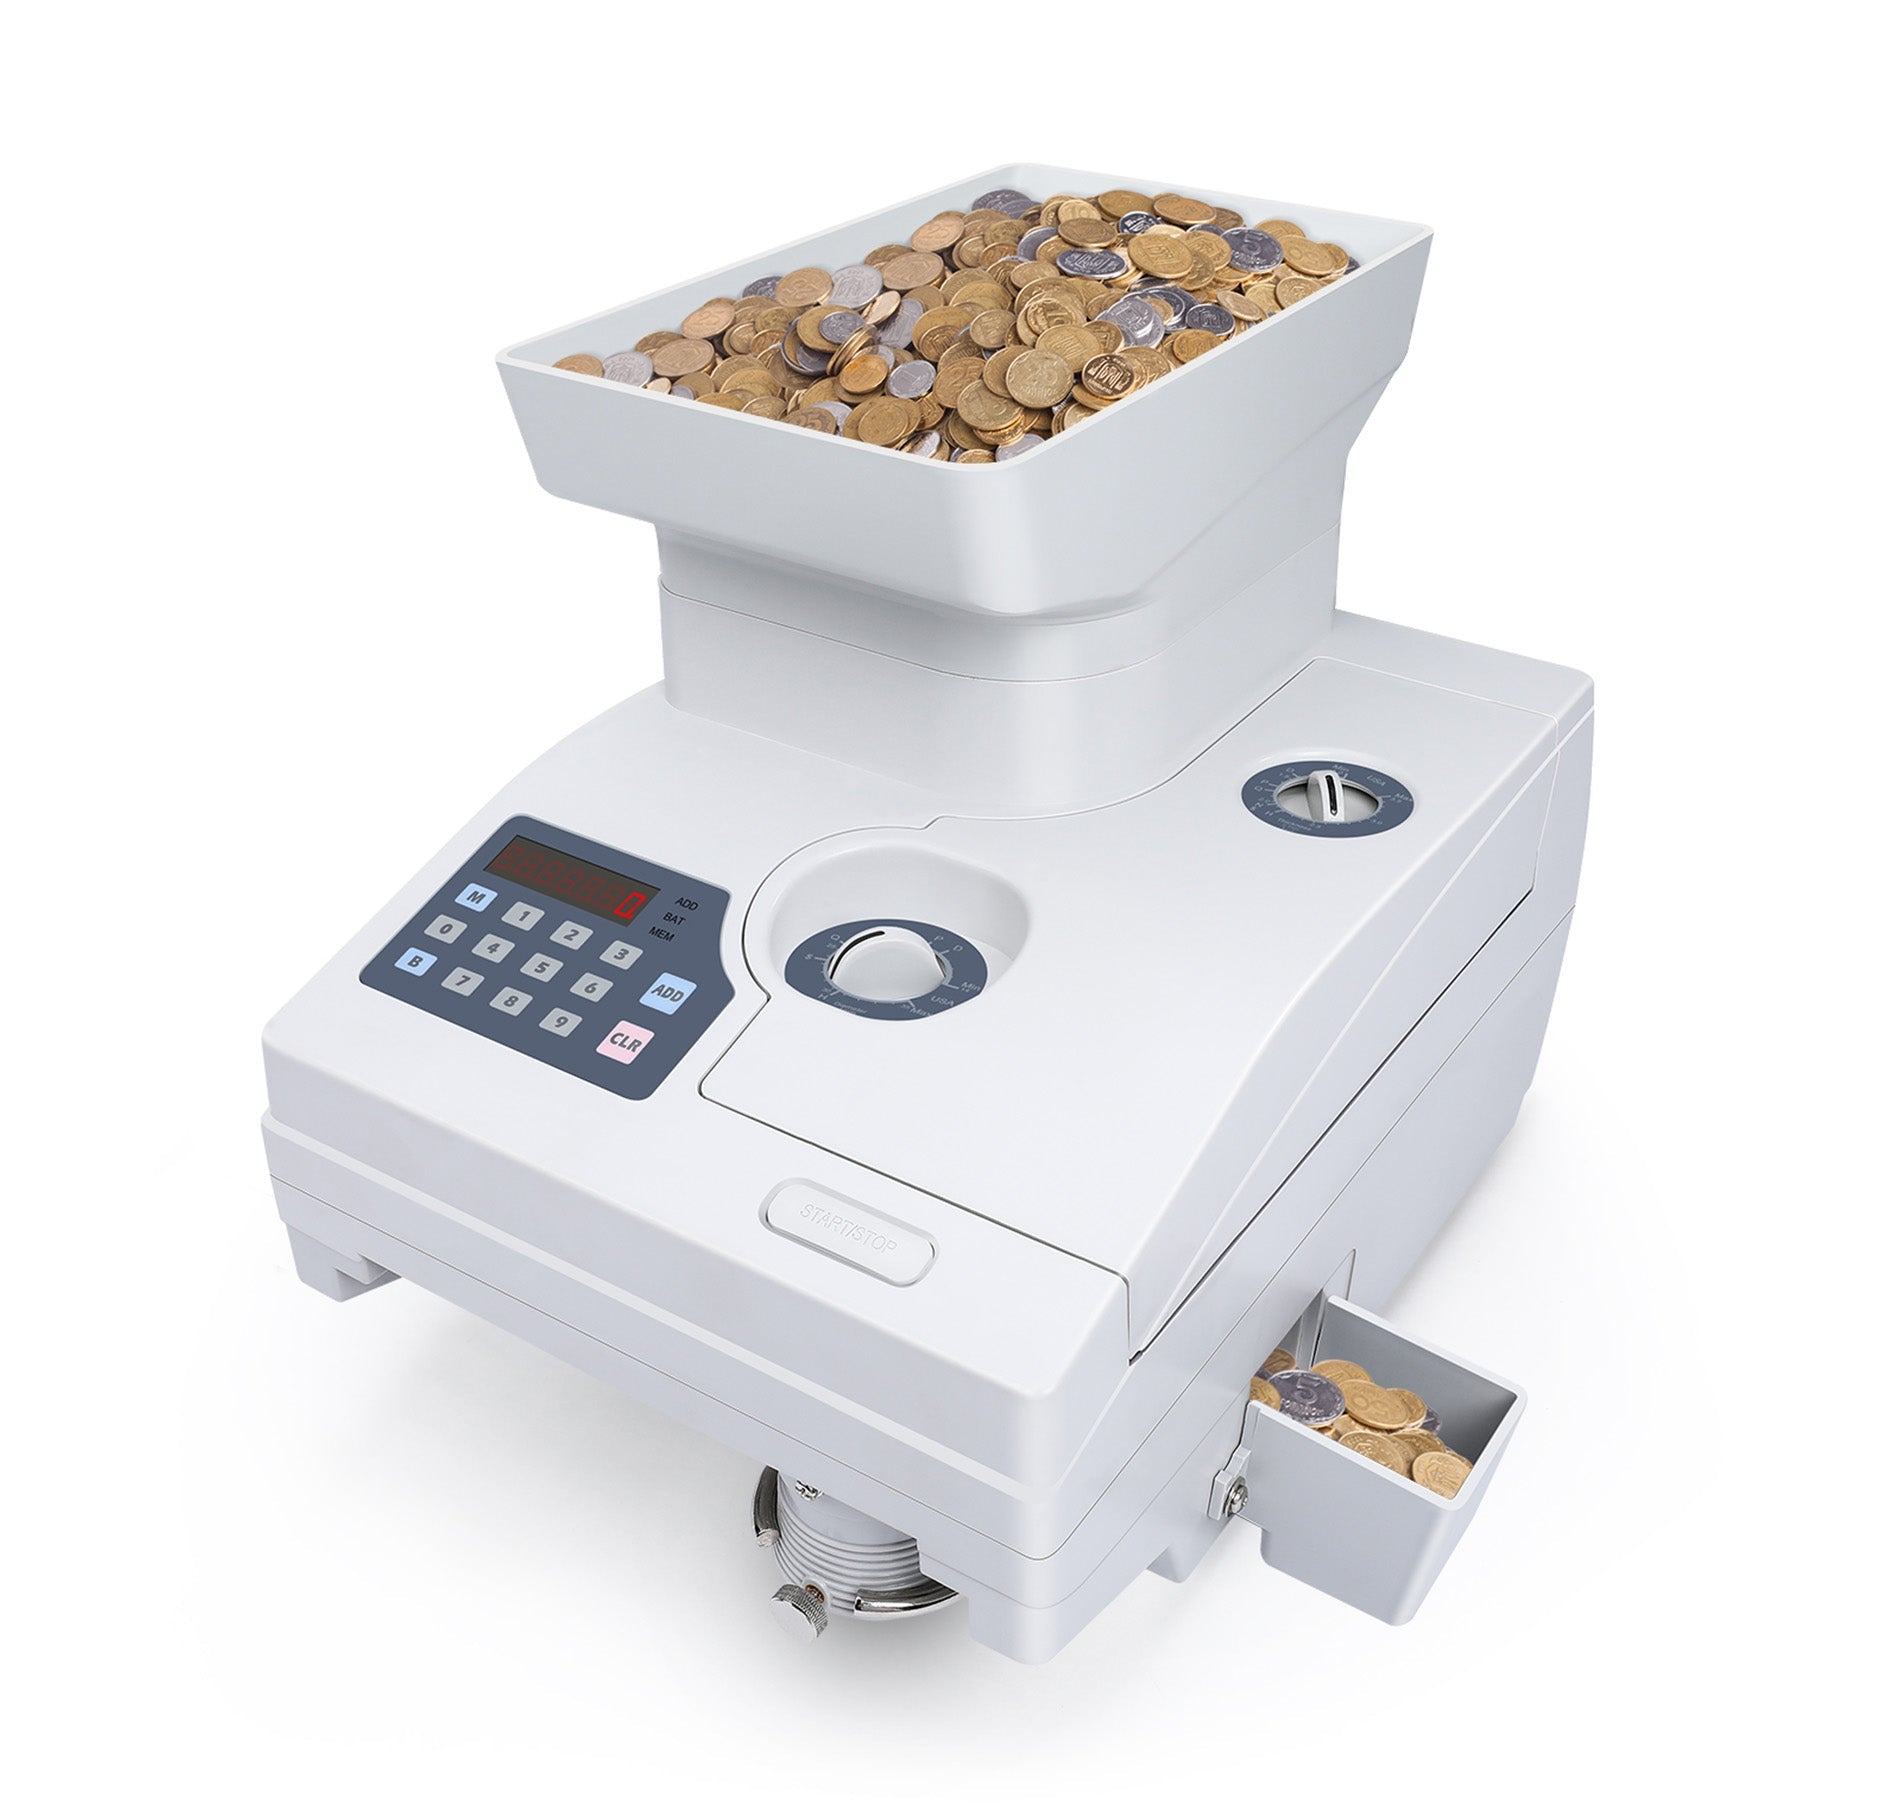  Ribao HCS-3500AH Coin Counter, Heavy Duty Bank Grade Anti-Jam Coin  Sorter with Motorized Hopper, Two-Year Warranty : Office Products